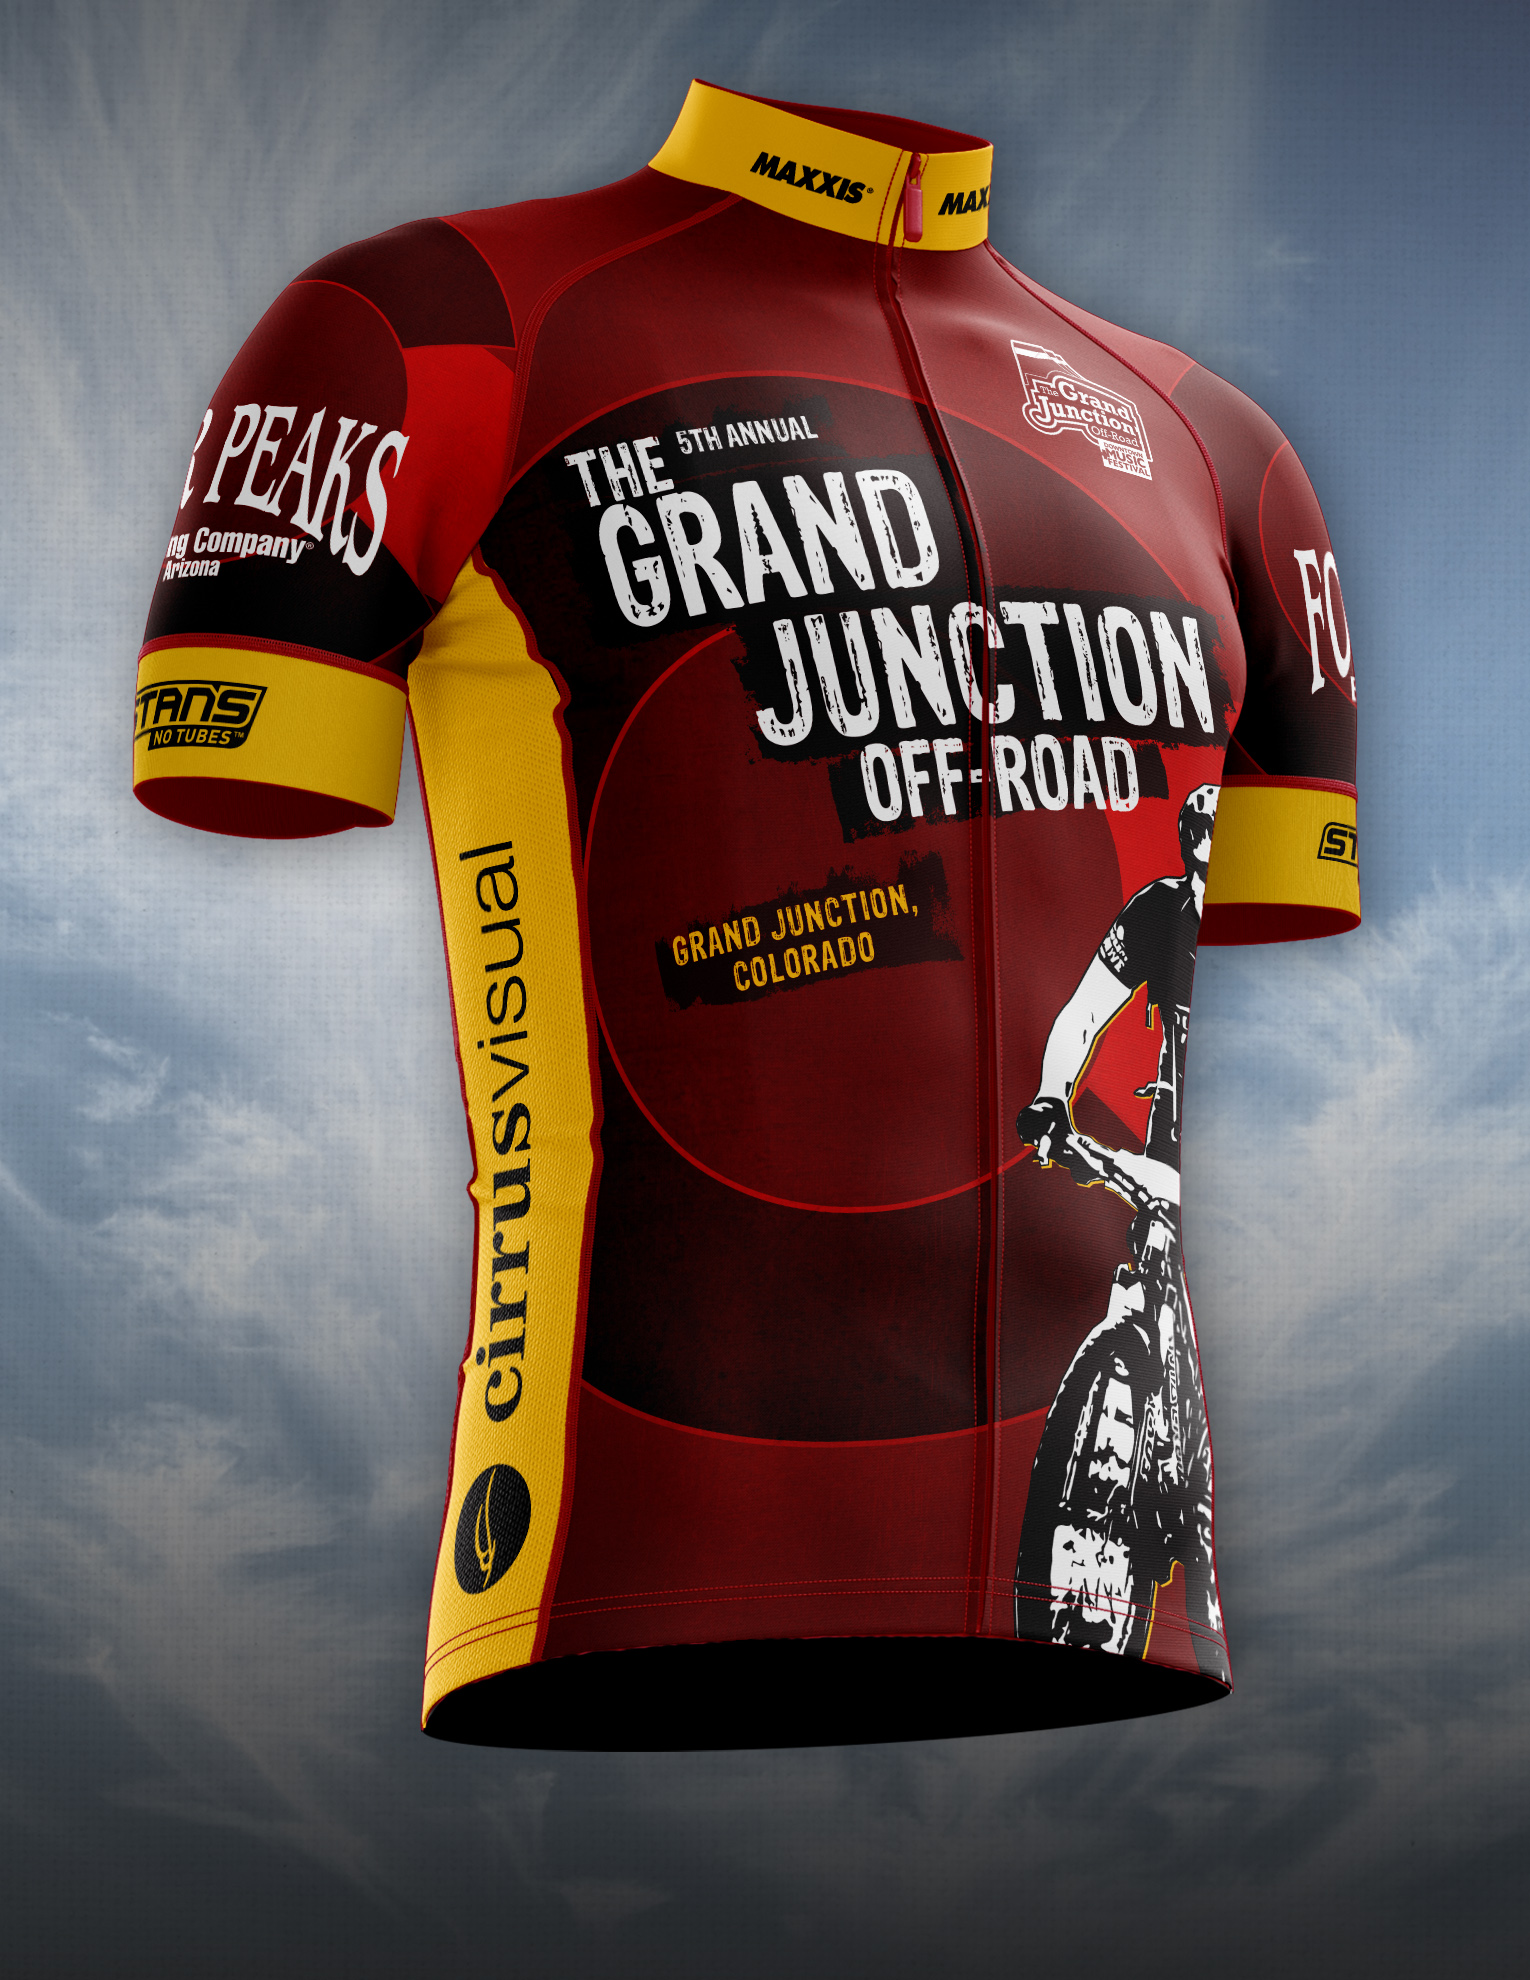 Download Grand Junction Off-Road Jersey - 2017 | Epic Rides ...a good day on the bike